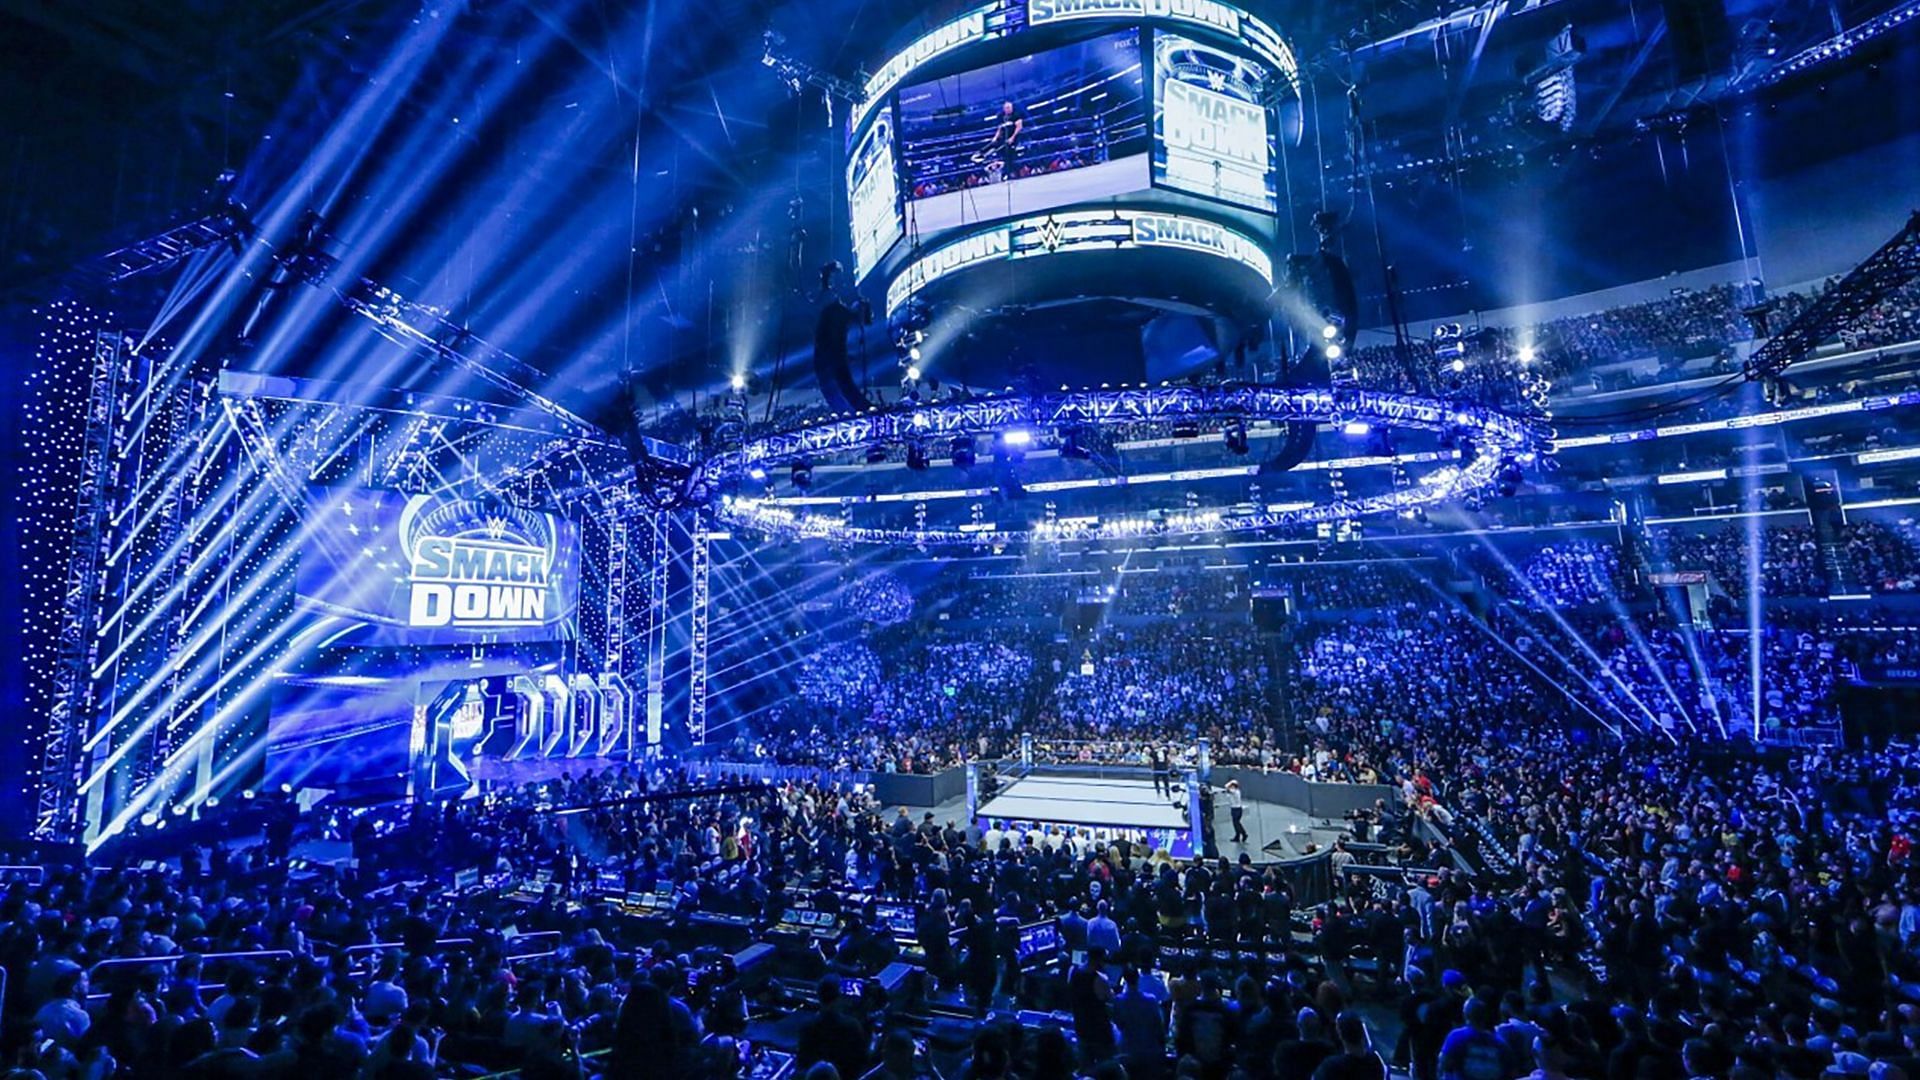 The WWE SmackDown logos and ring on display inside arena